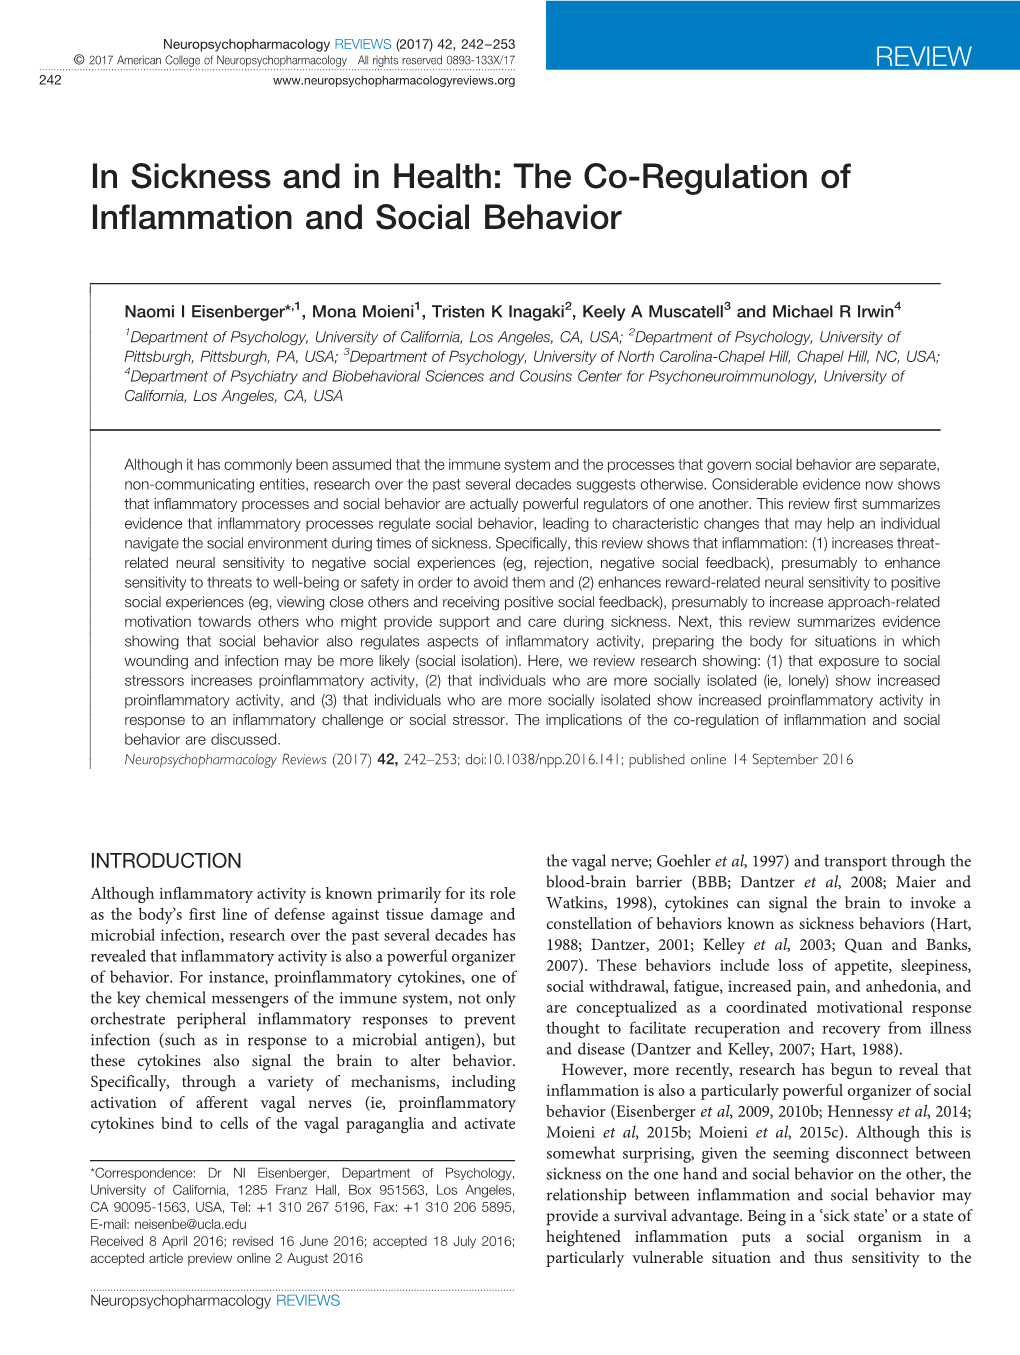 The Co-Regulation of Inflammation and Social Behavior